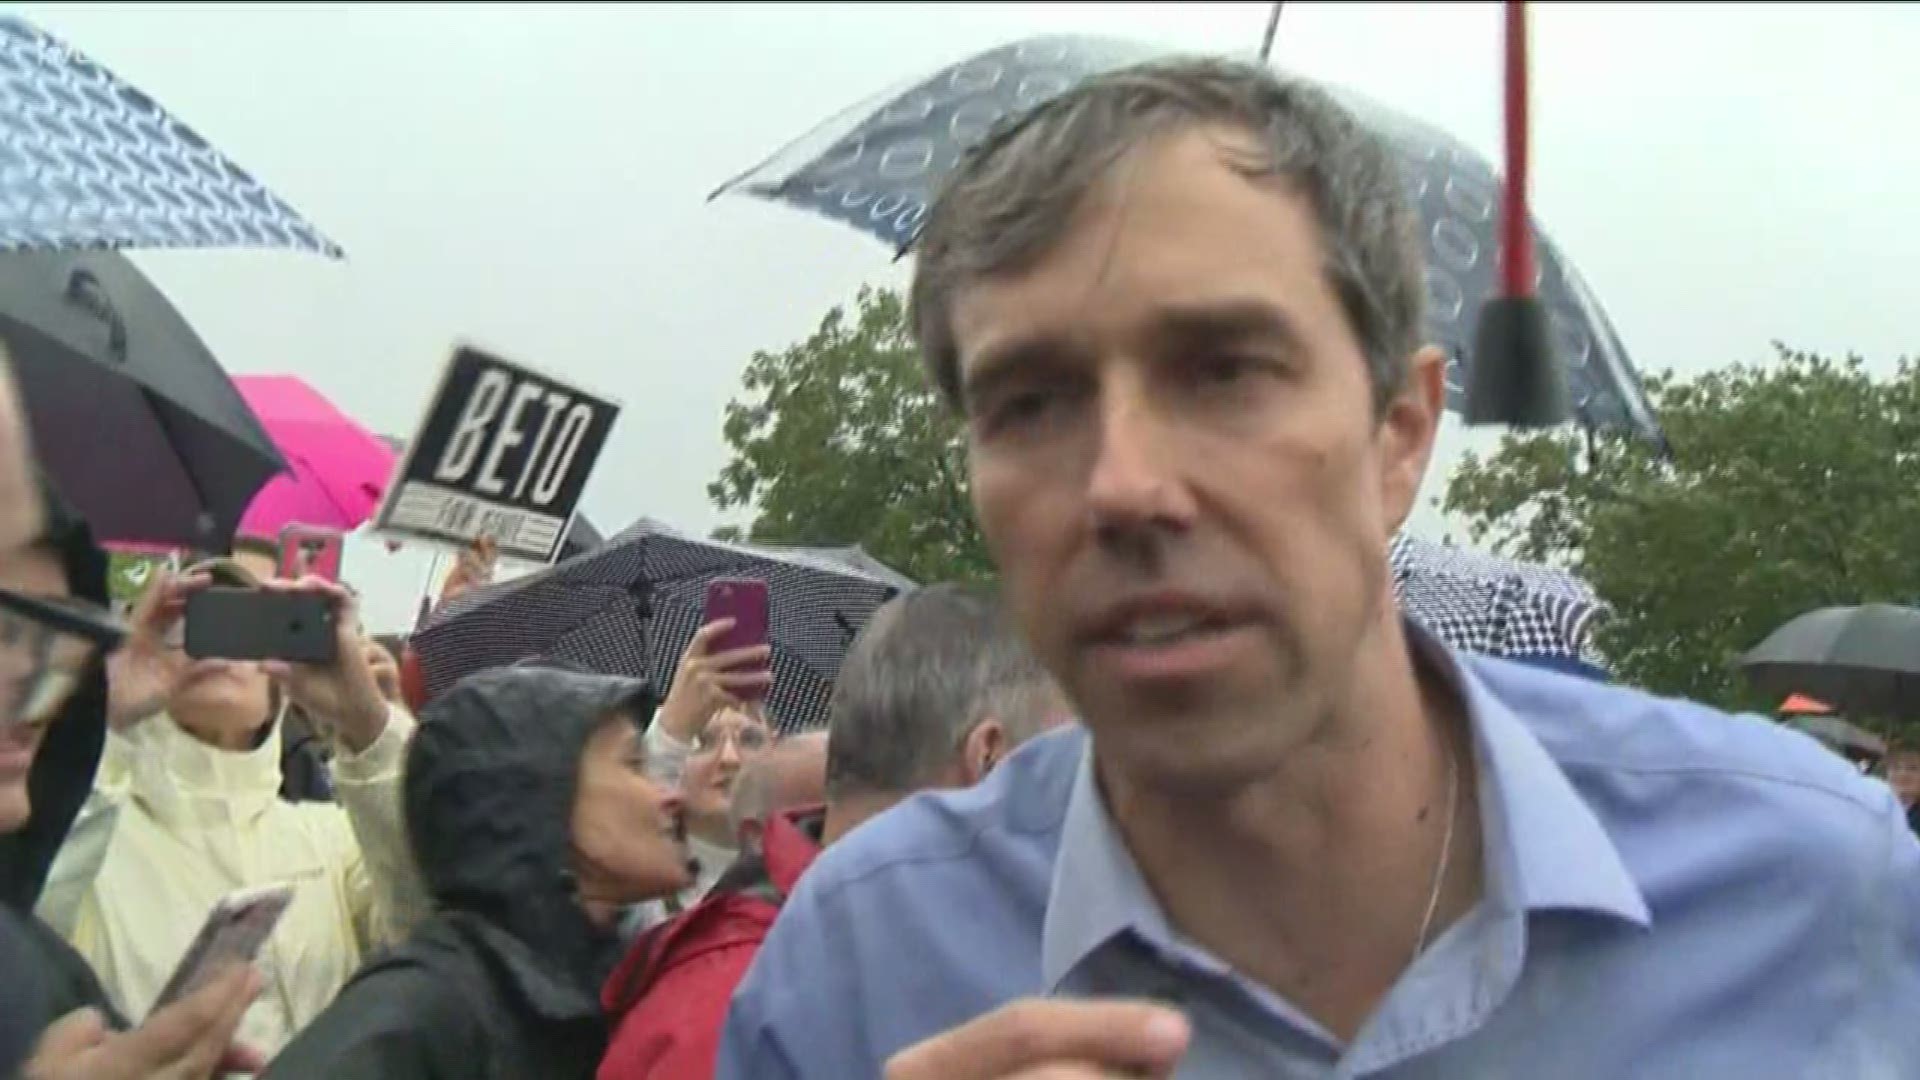 U.S. Rep. Beto O'Rourke said at a town hall in El Paso that he and his wife had "made a decision not to rule anything out."